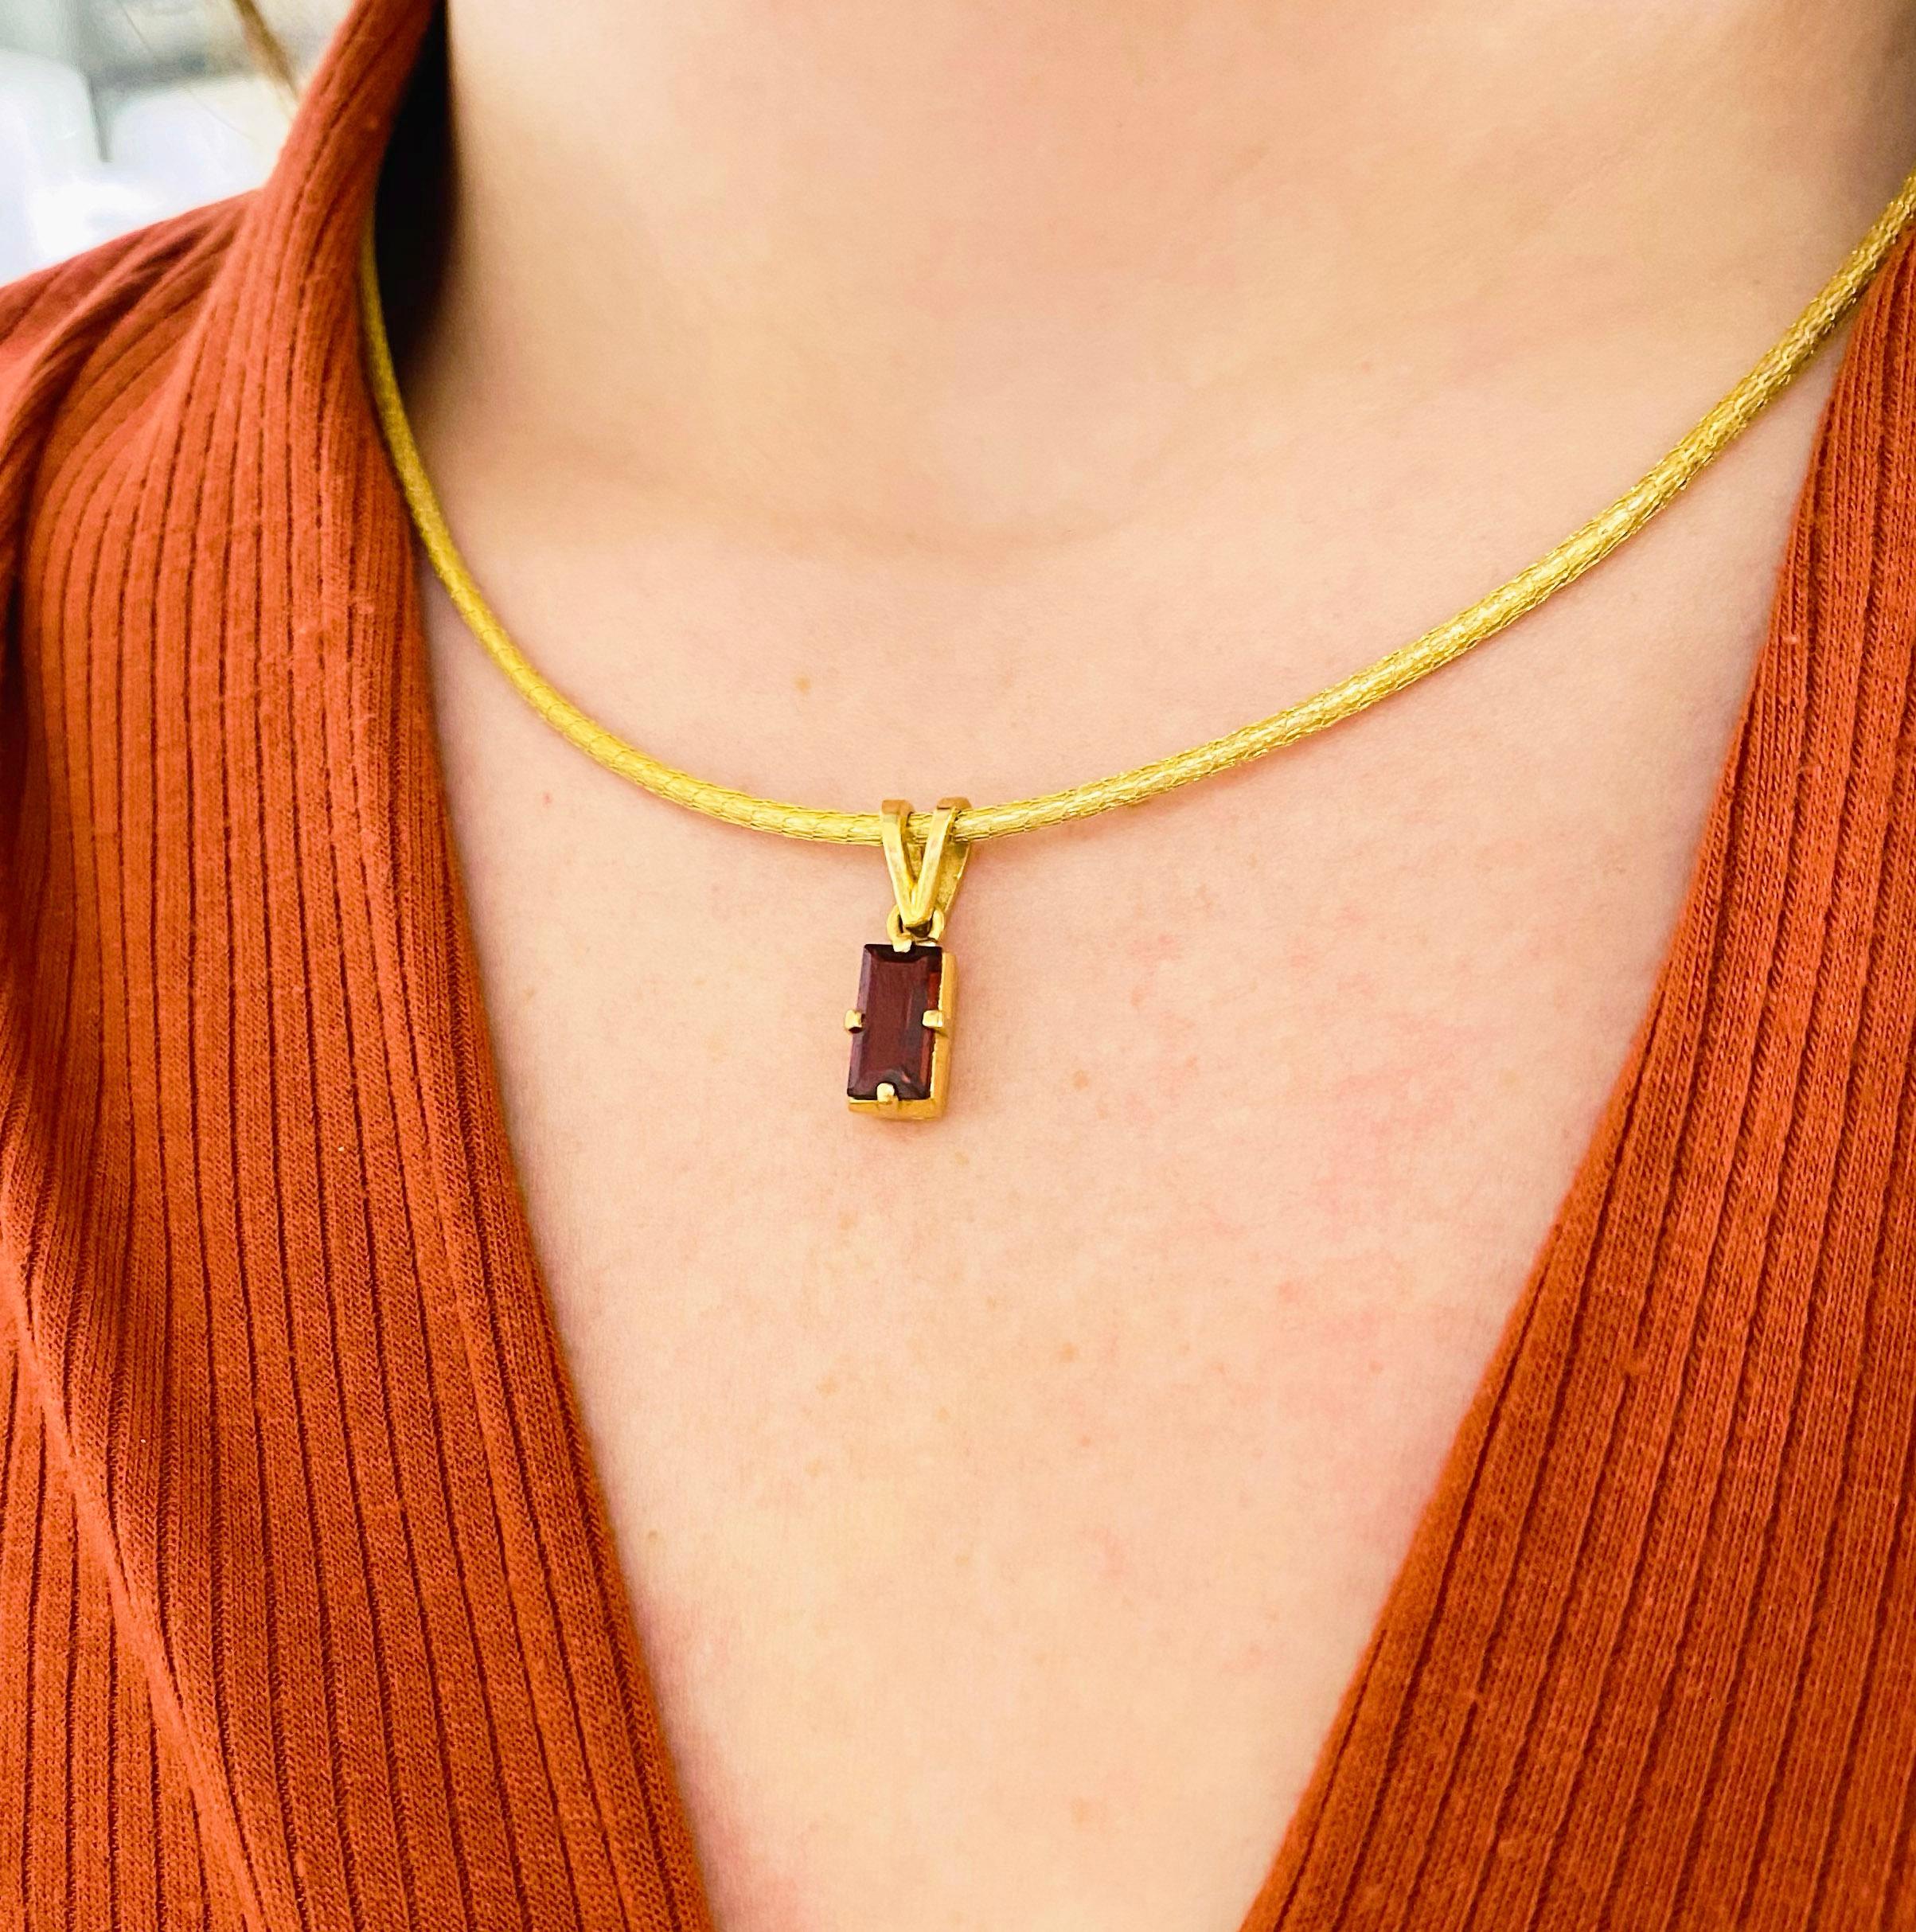 This stunningly beautiful Brazilian genuine garnet is set in polished 18k yellow gold draped on a gorgeous gold silk chain provides a look that is very modern yet classic! This necklace is very fashionable and can add a touch of style to any outfit,